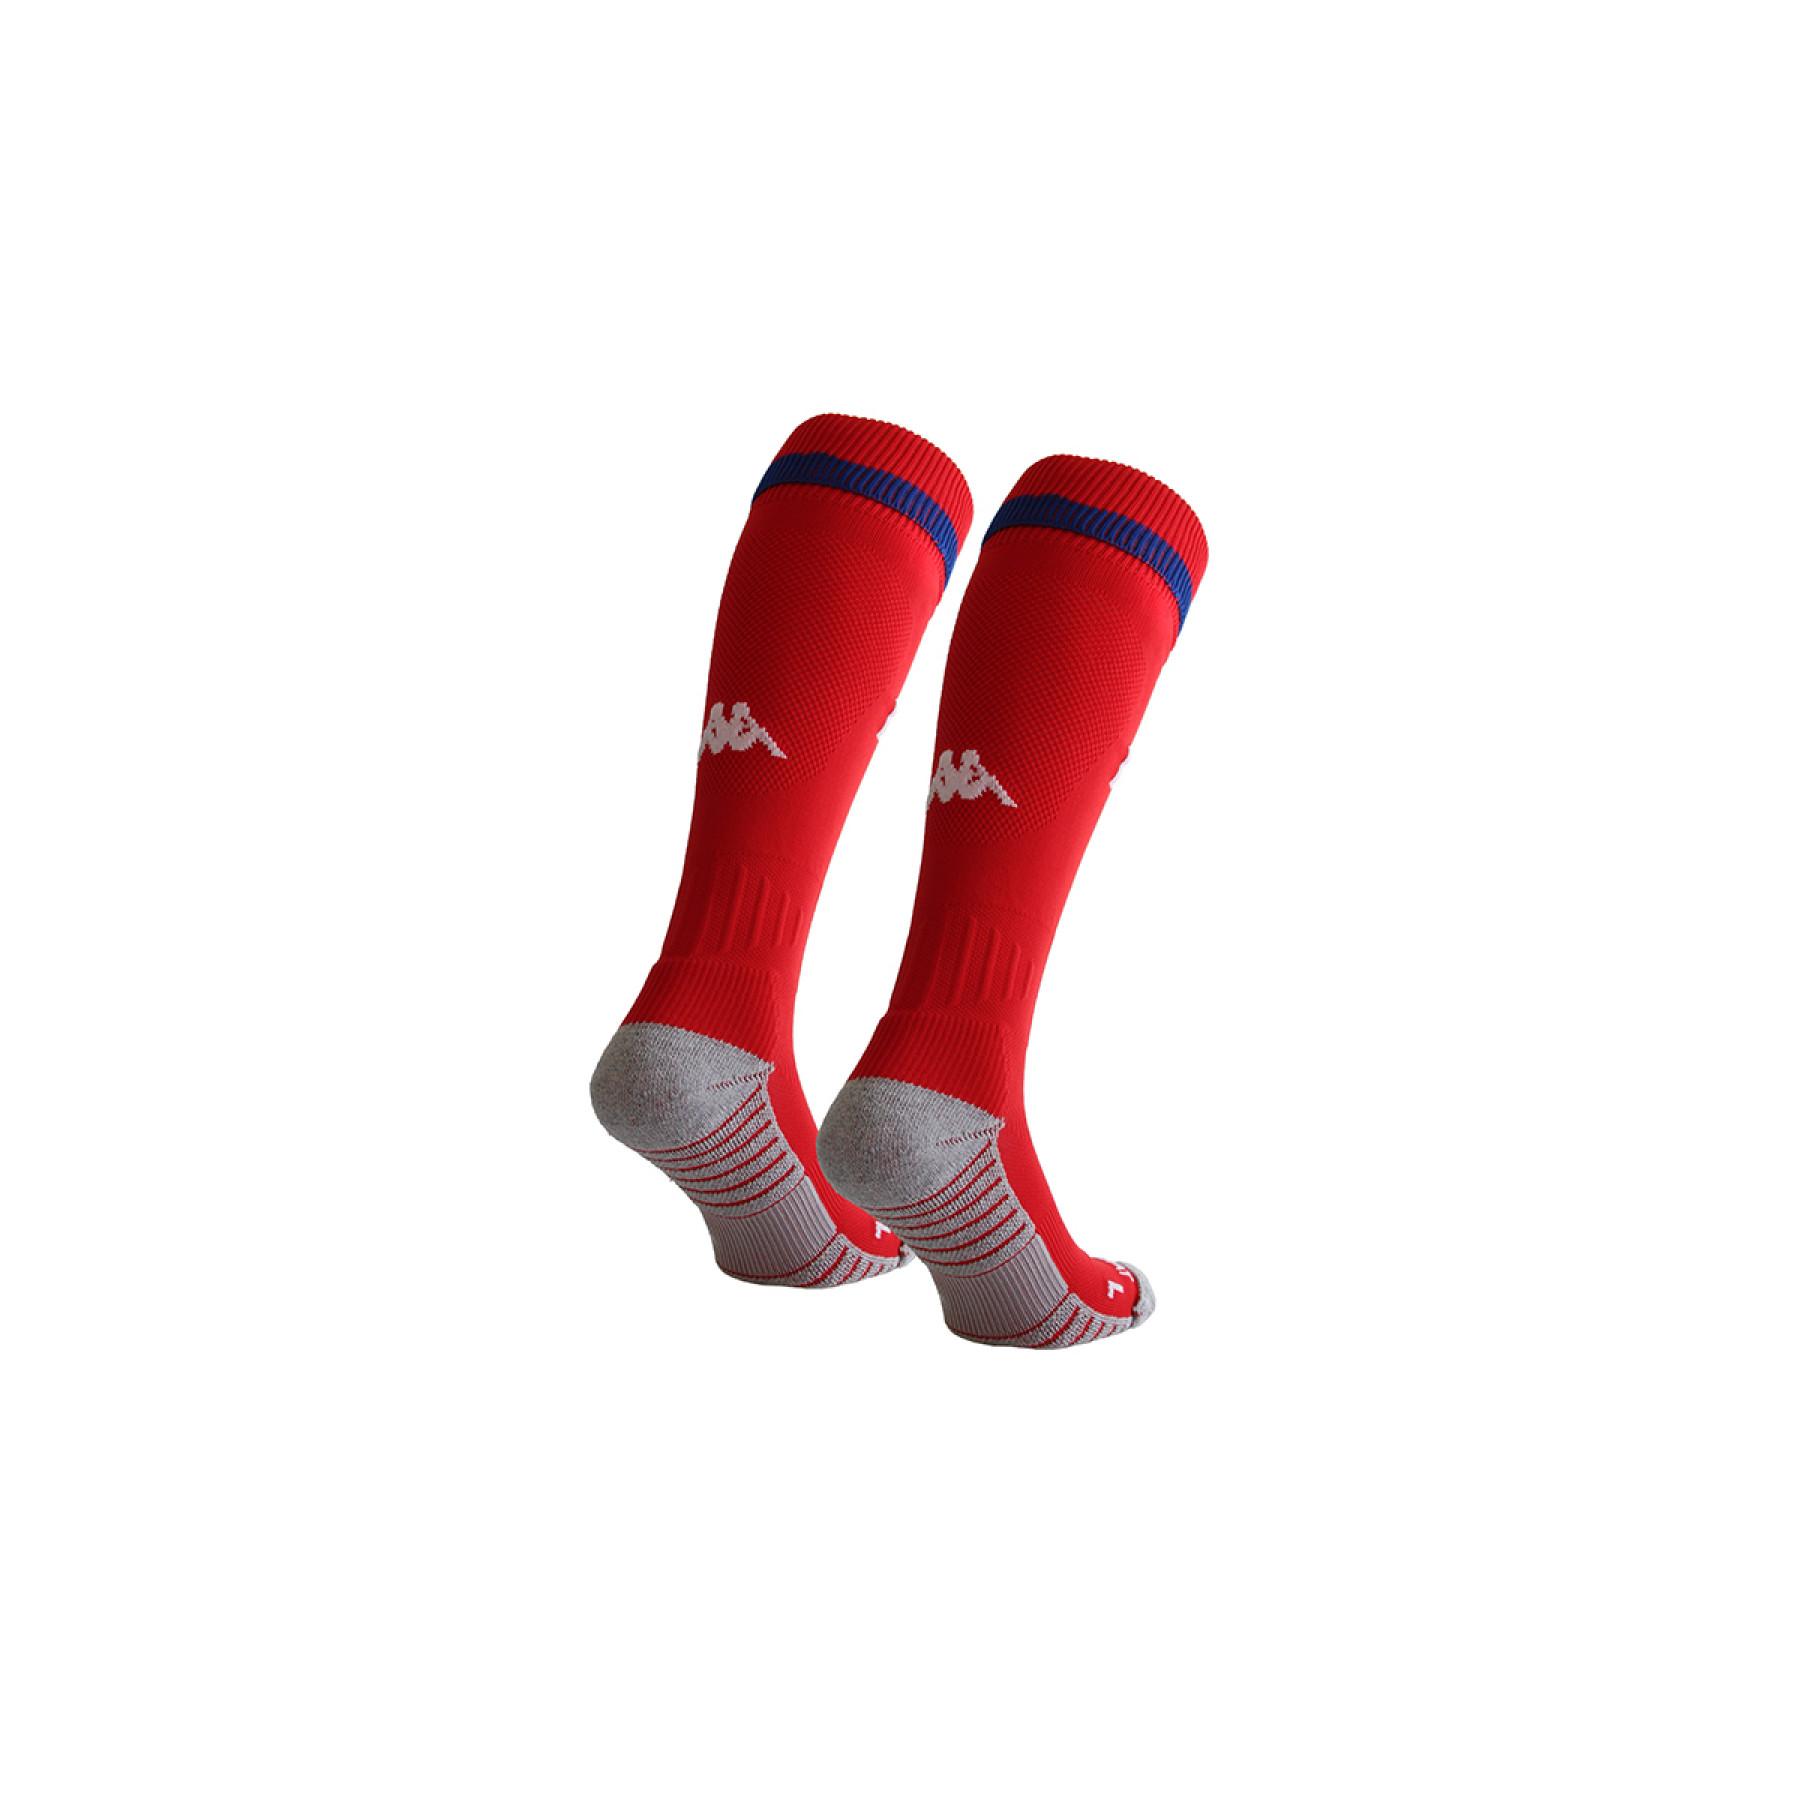 Chaussettes FC Grenoble Rugby 2020/21 spark pro 3p